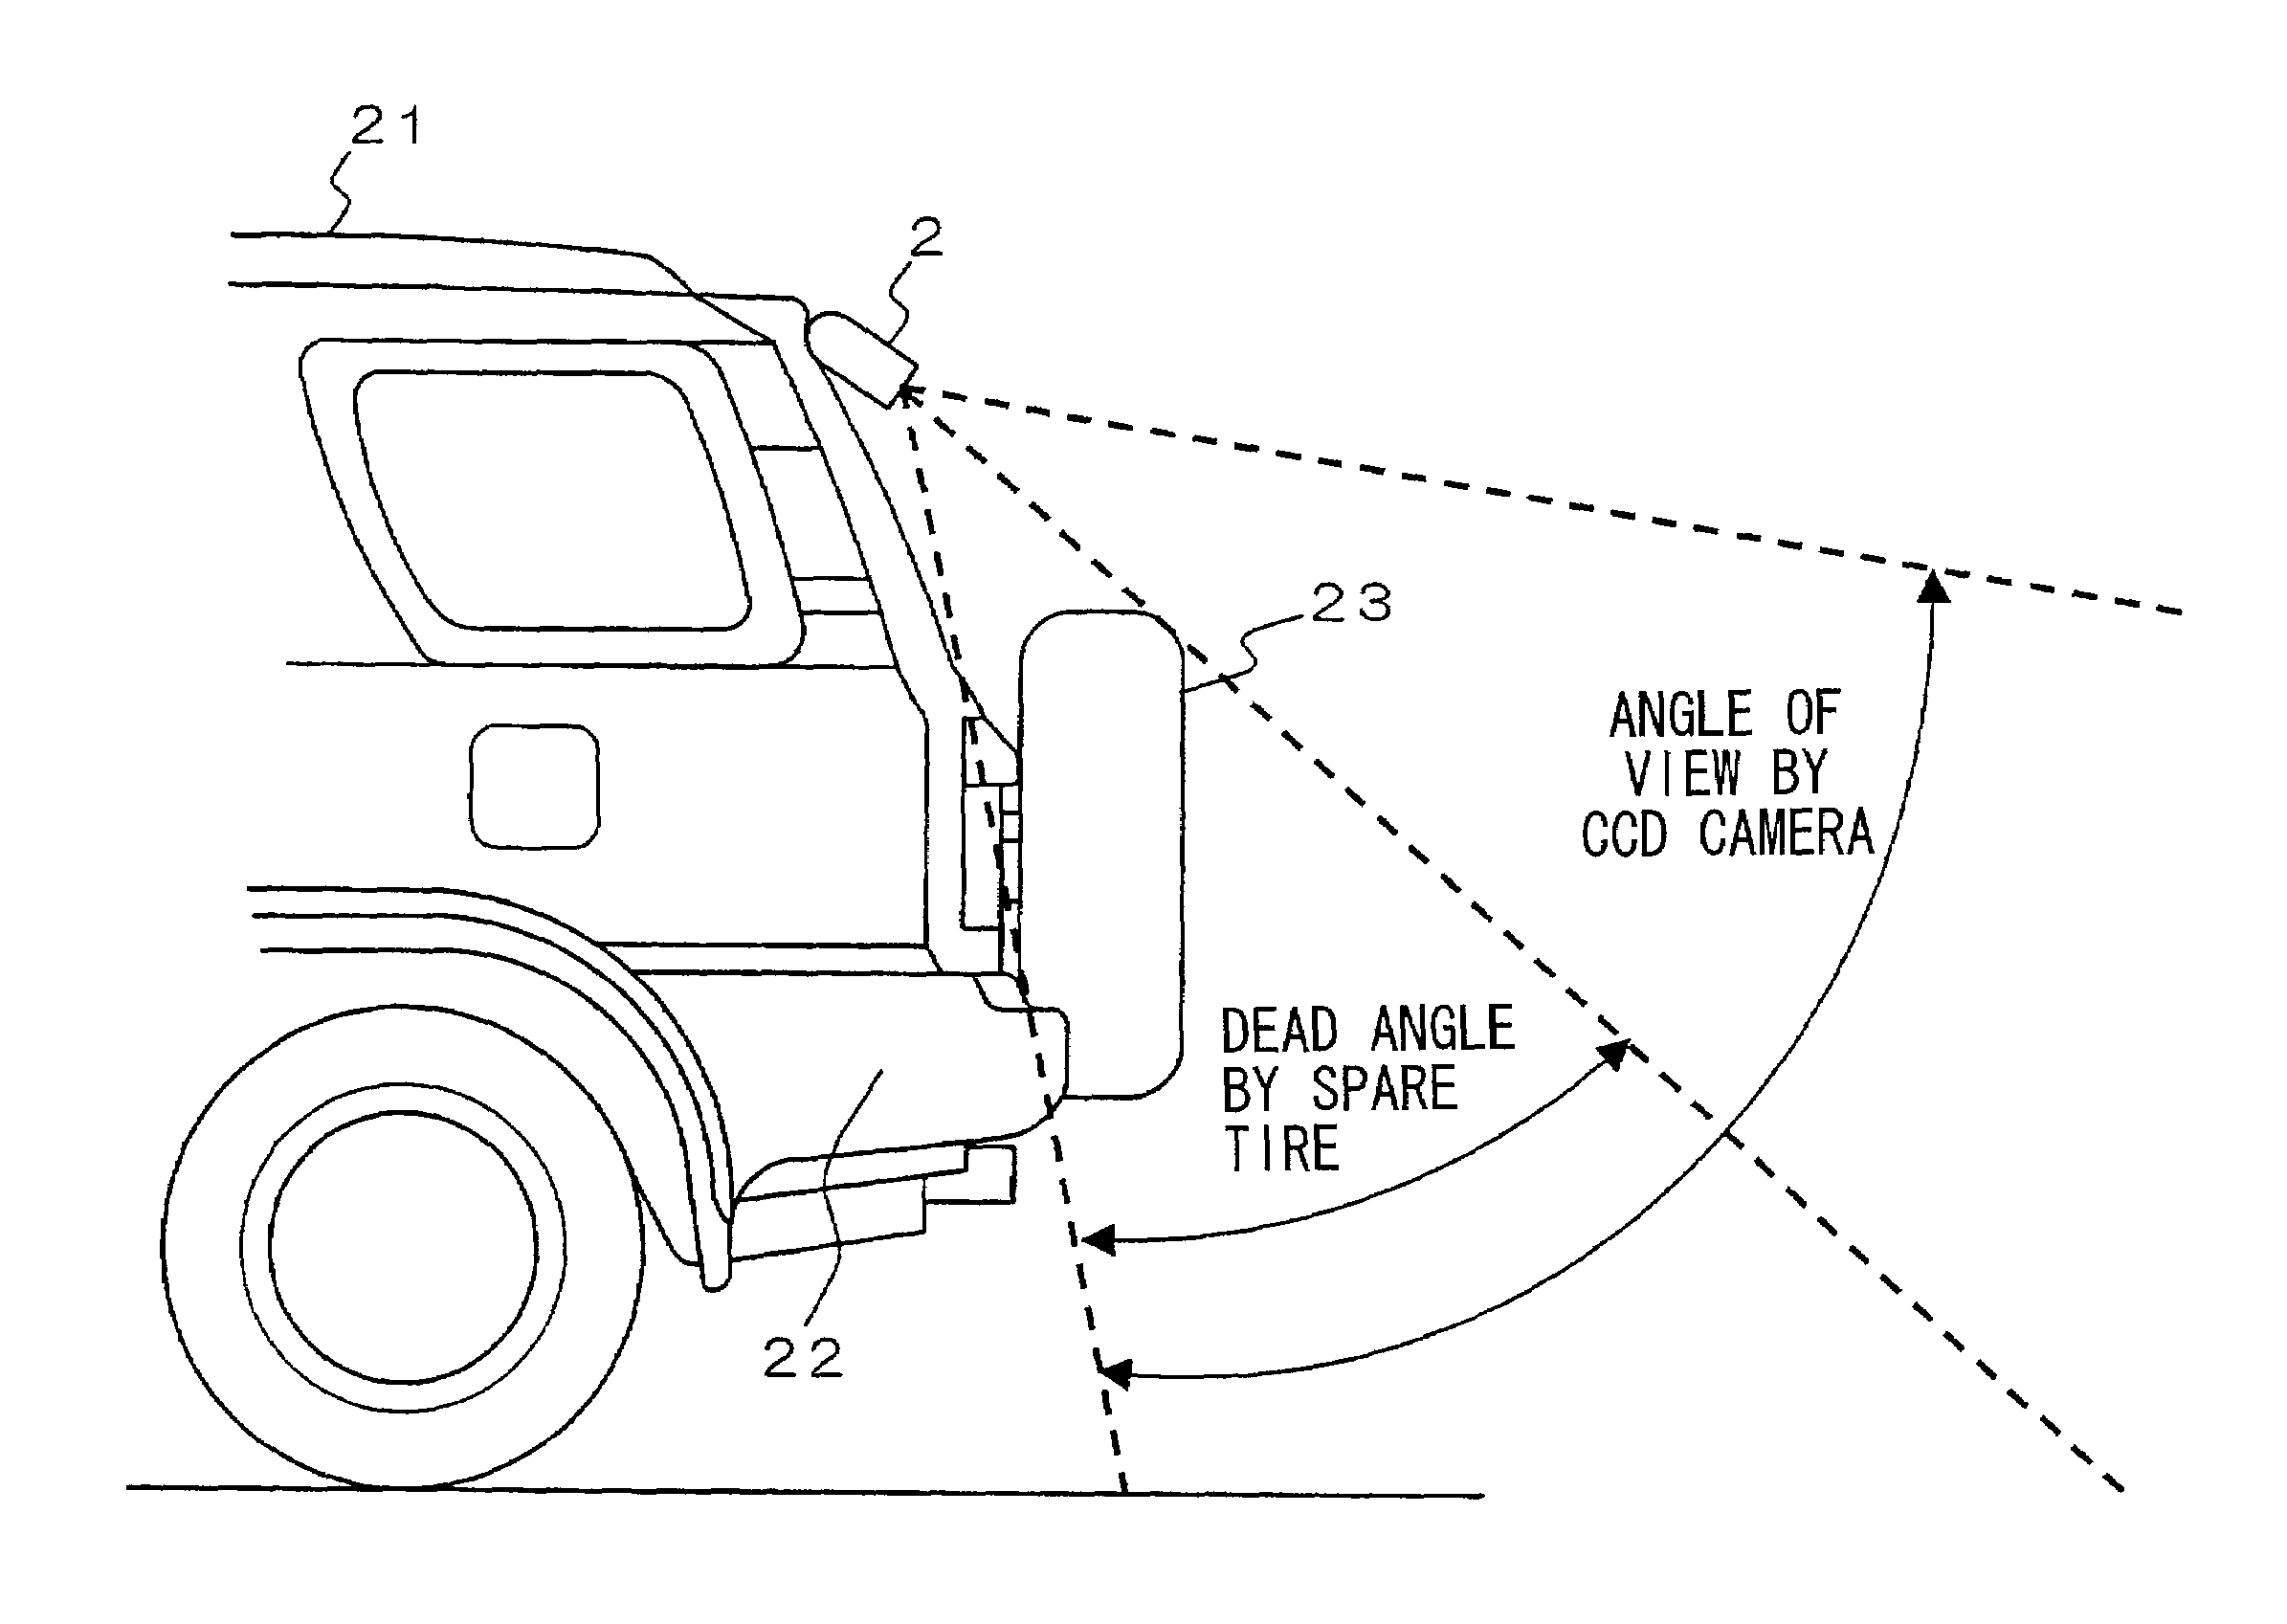 Rearview monitoring apparatus for vehicle